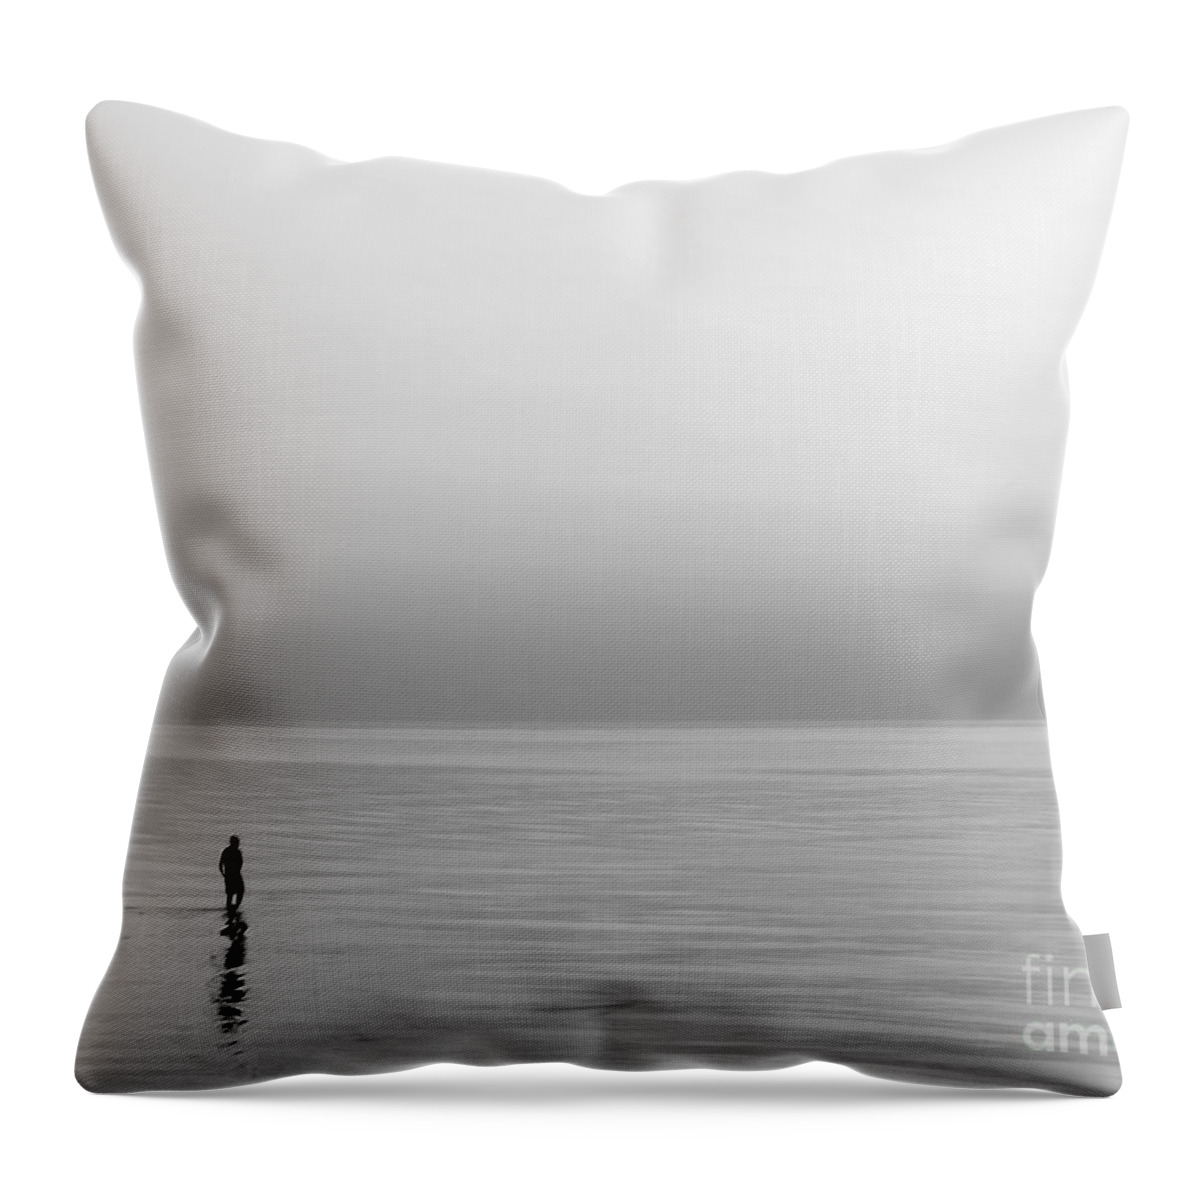 Lake Throw Pillow featuring the photograph One Man #1 by Dana DiPasquale